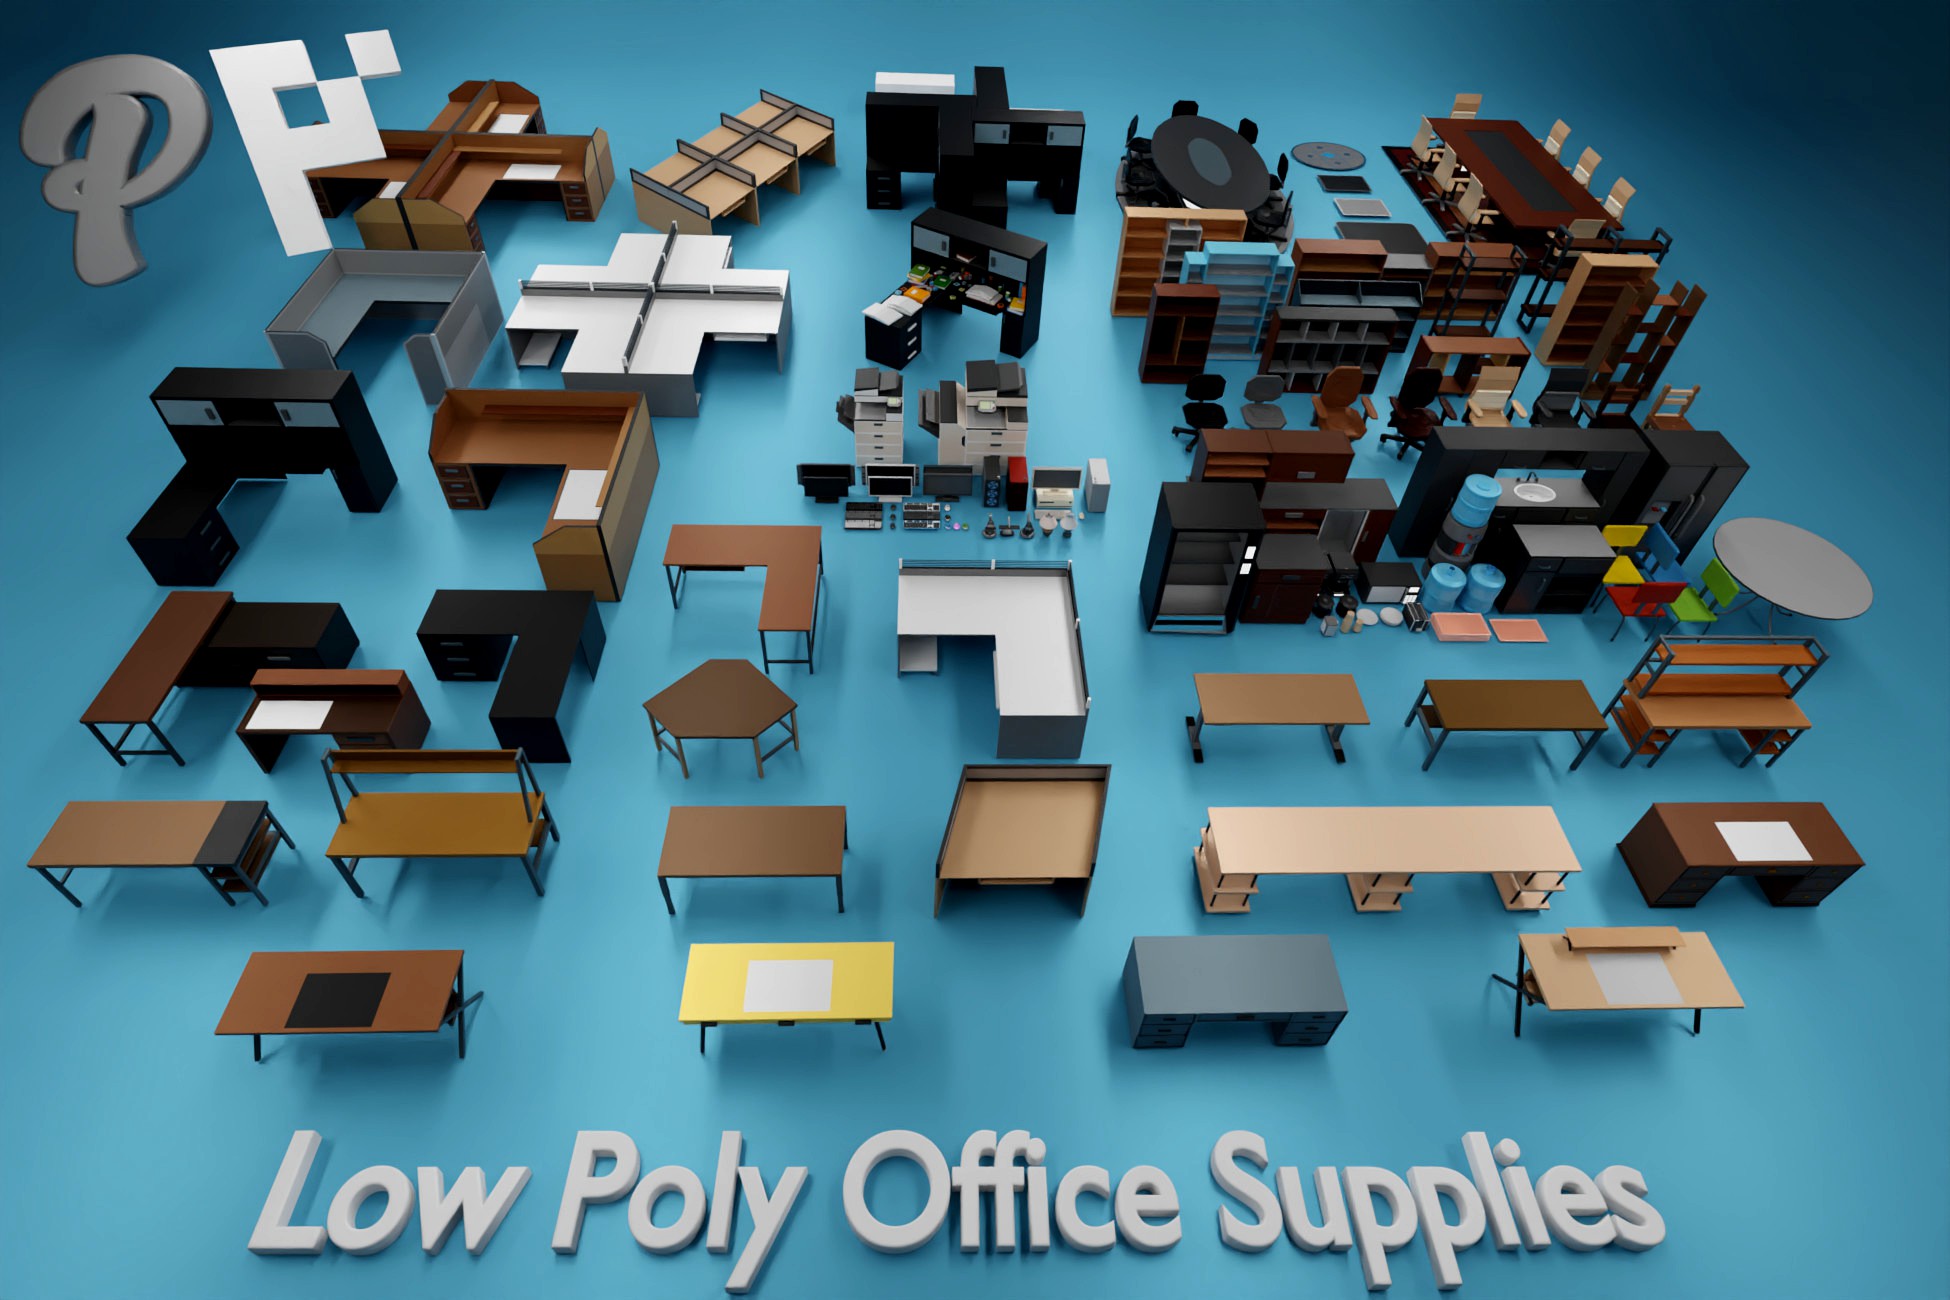 Low-Poly Office Supplies